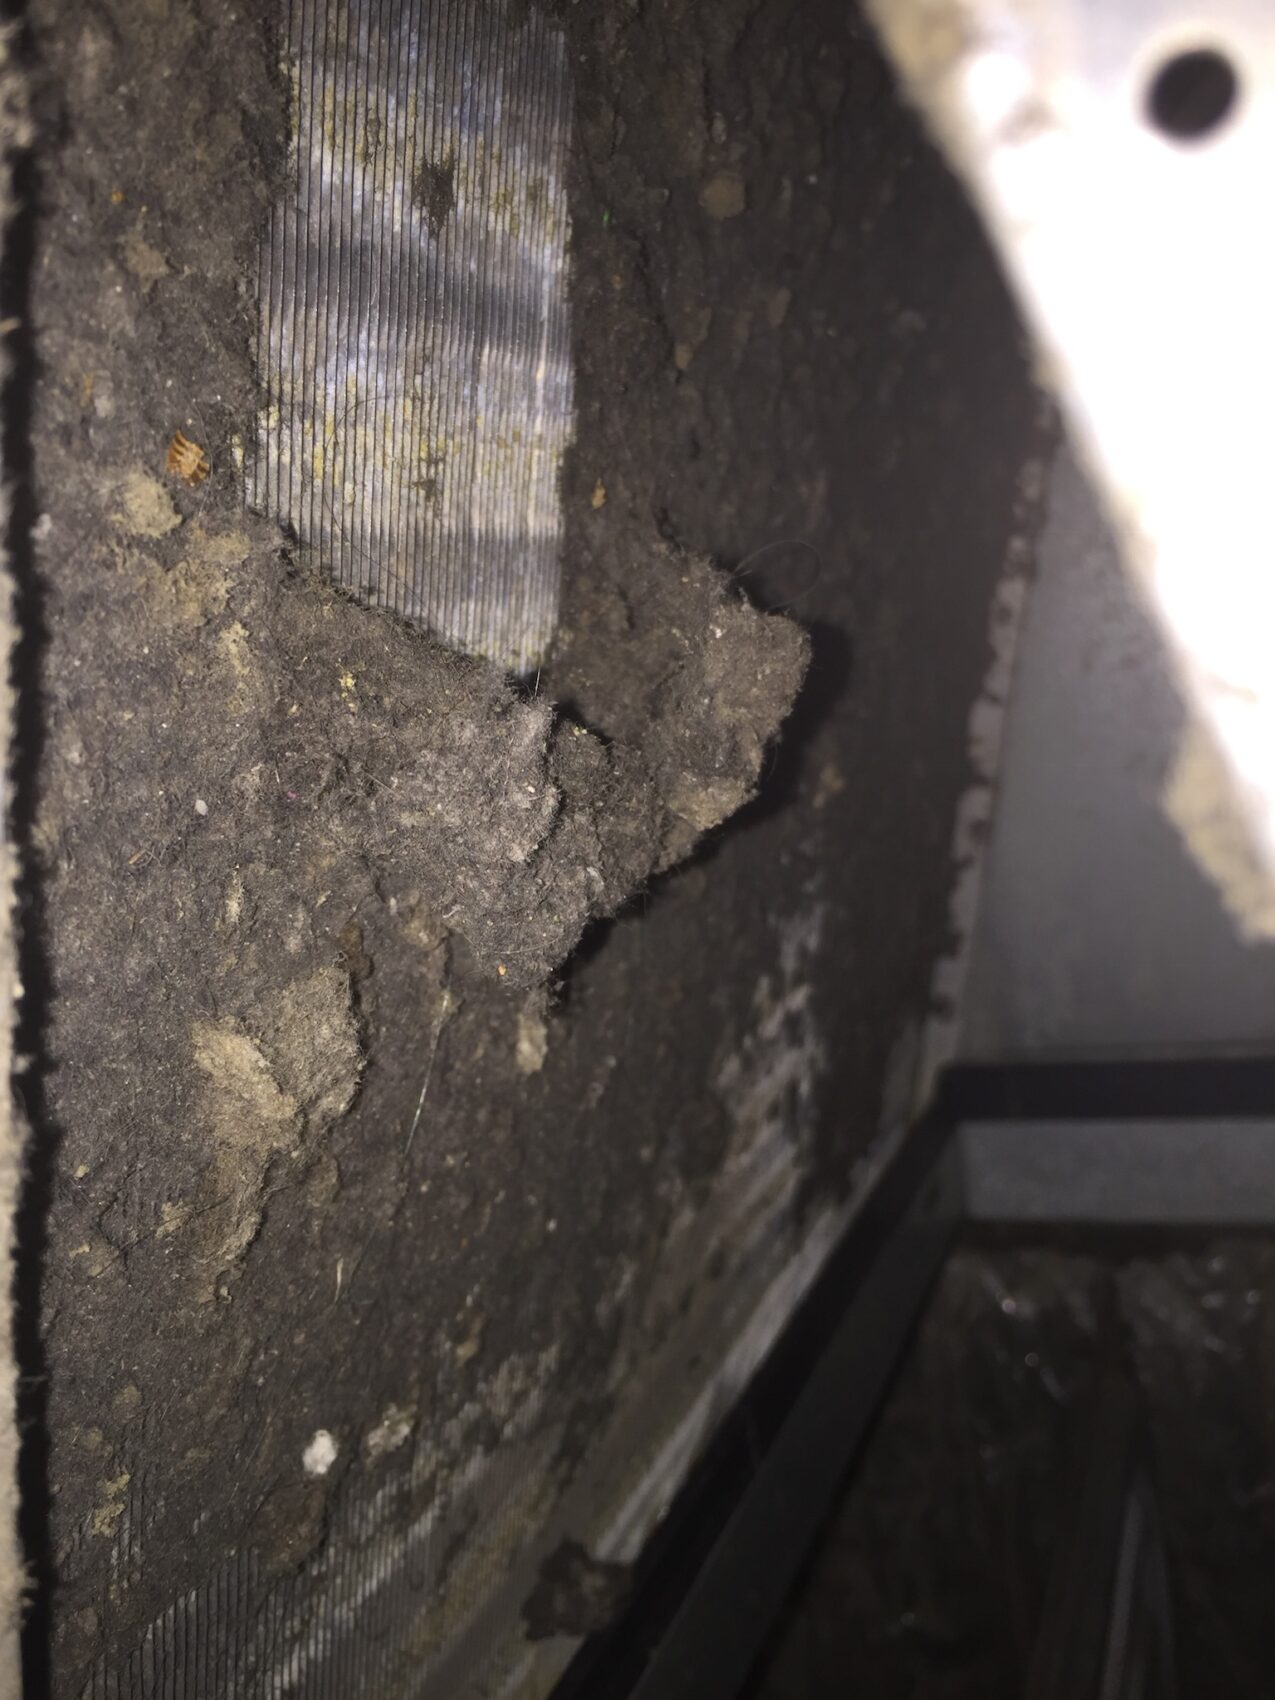 Ac coil Cleaning New Jersey